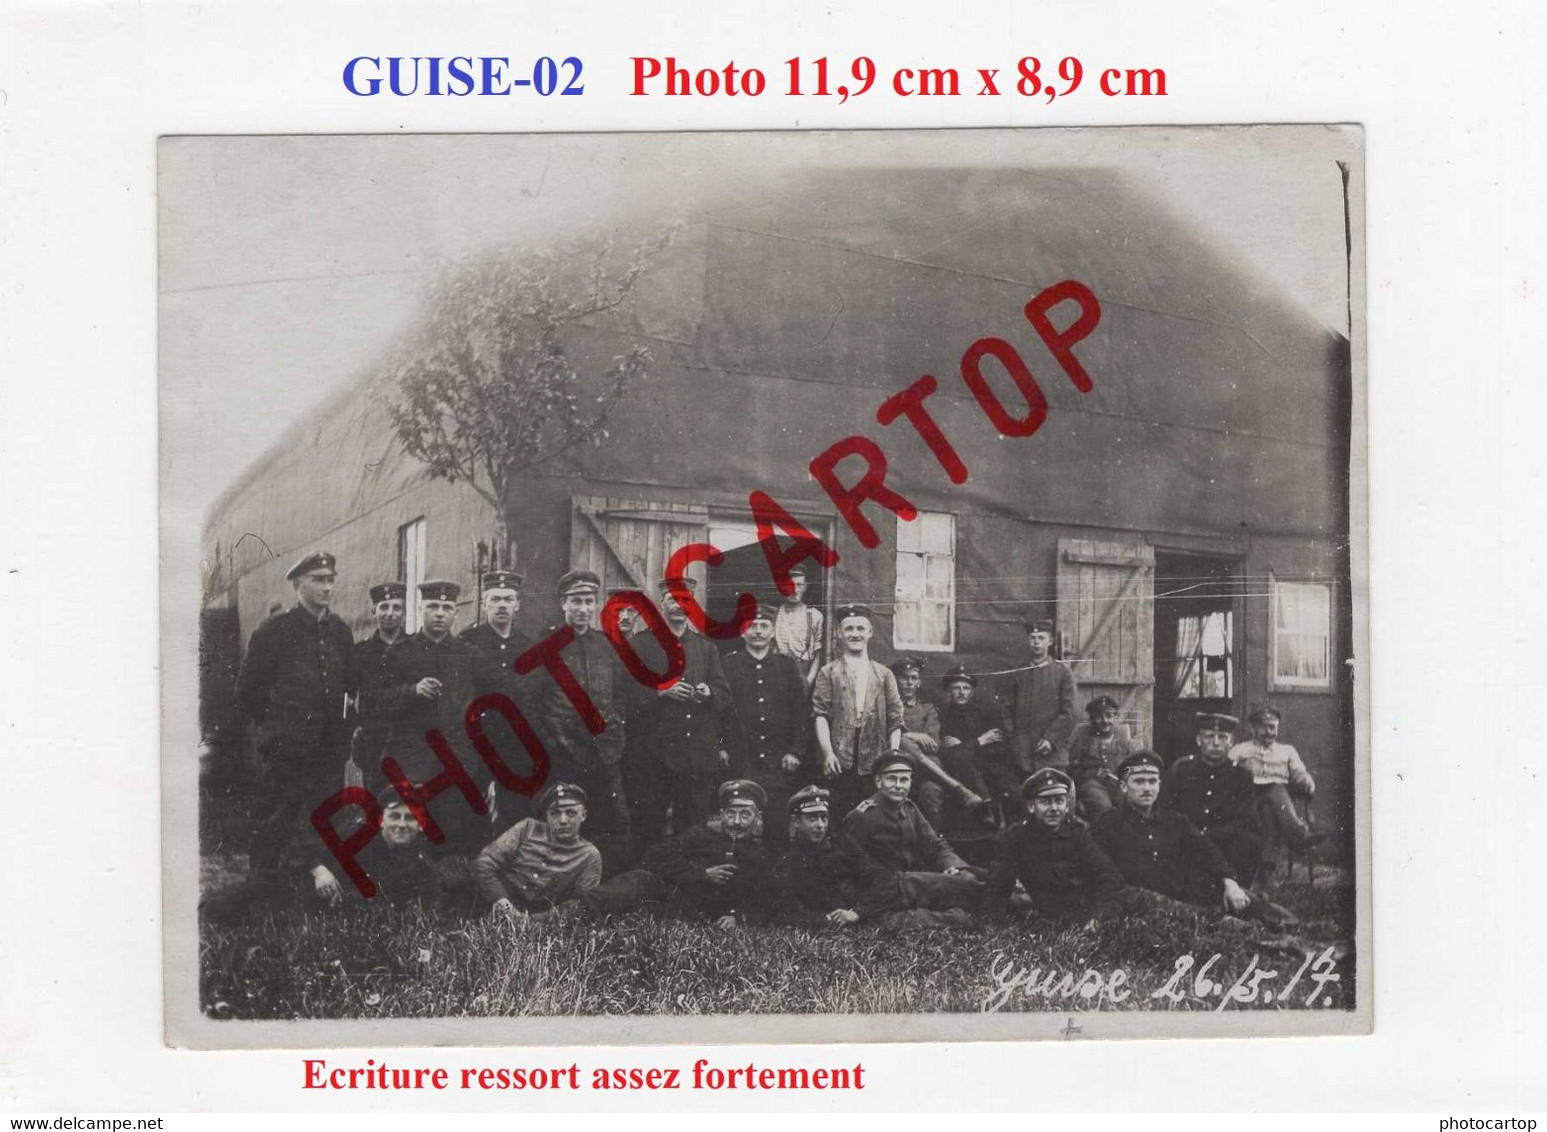 GUISE-F.FA.27-PHOTO Allemande-Guerre 14-18-1 WK-Militaria-Fliegerei-Aviation-France-02- - Guise